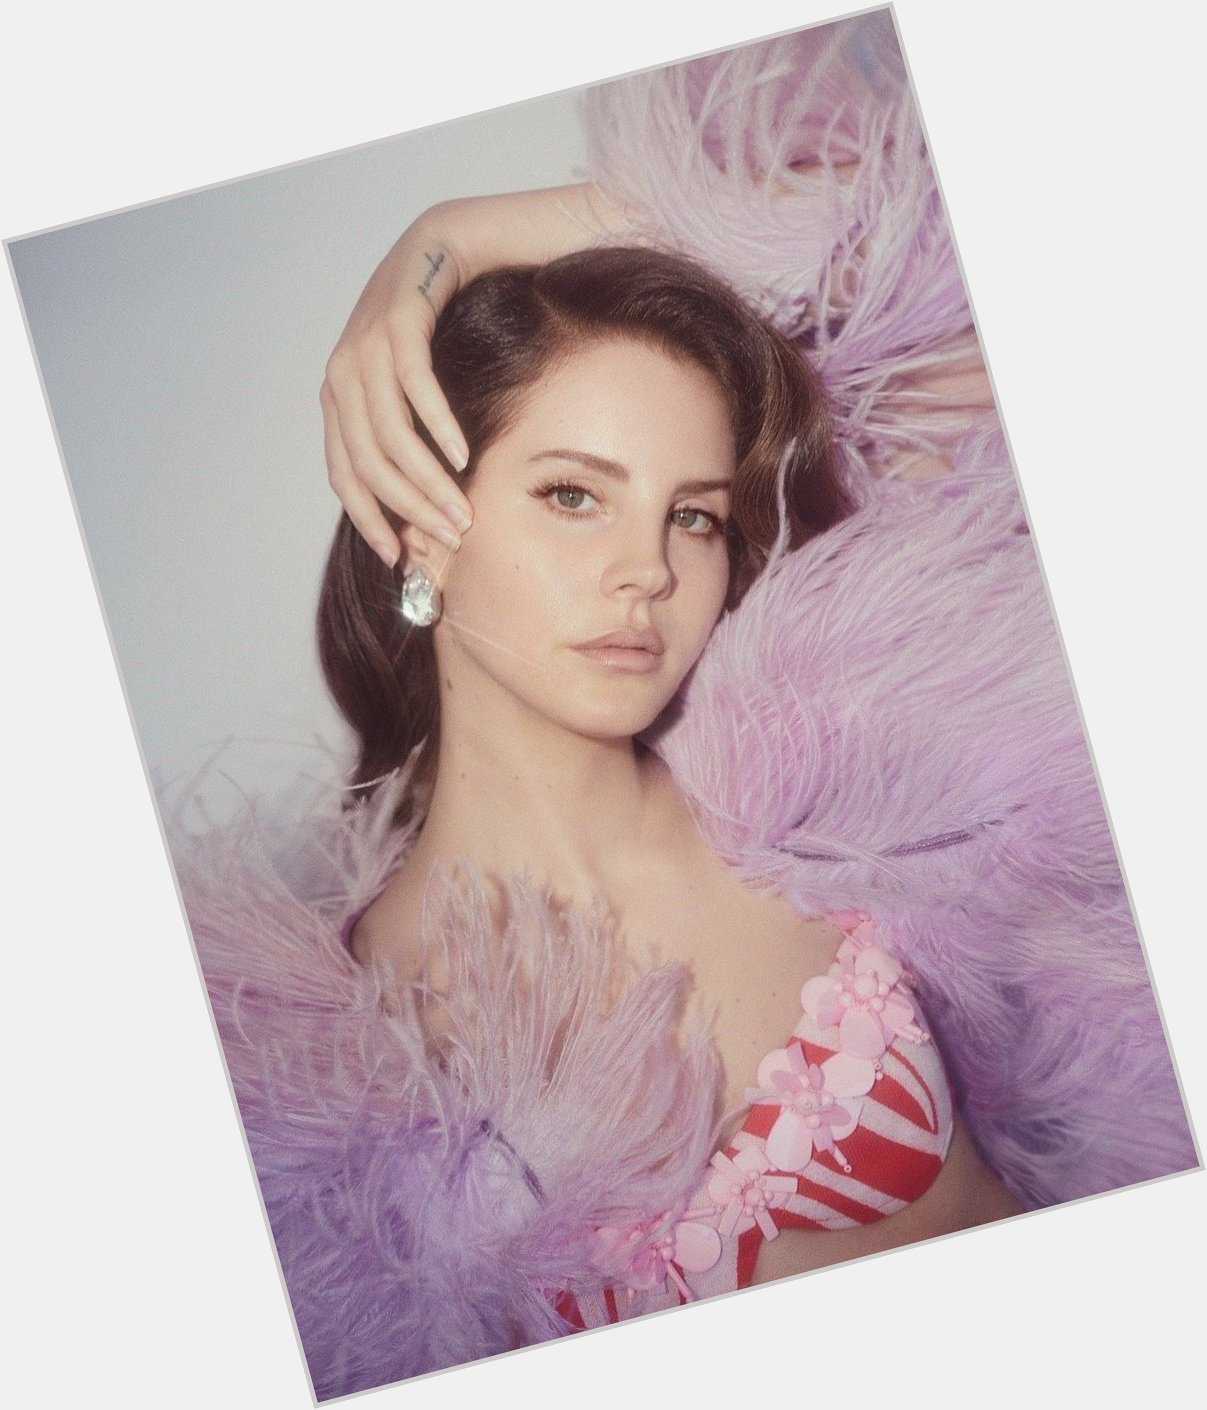 Happy birthday to the most beautiful bitch alive miss lana del rey  